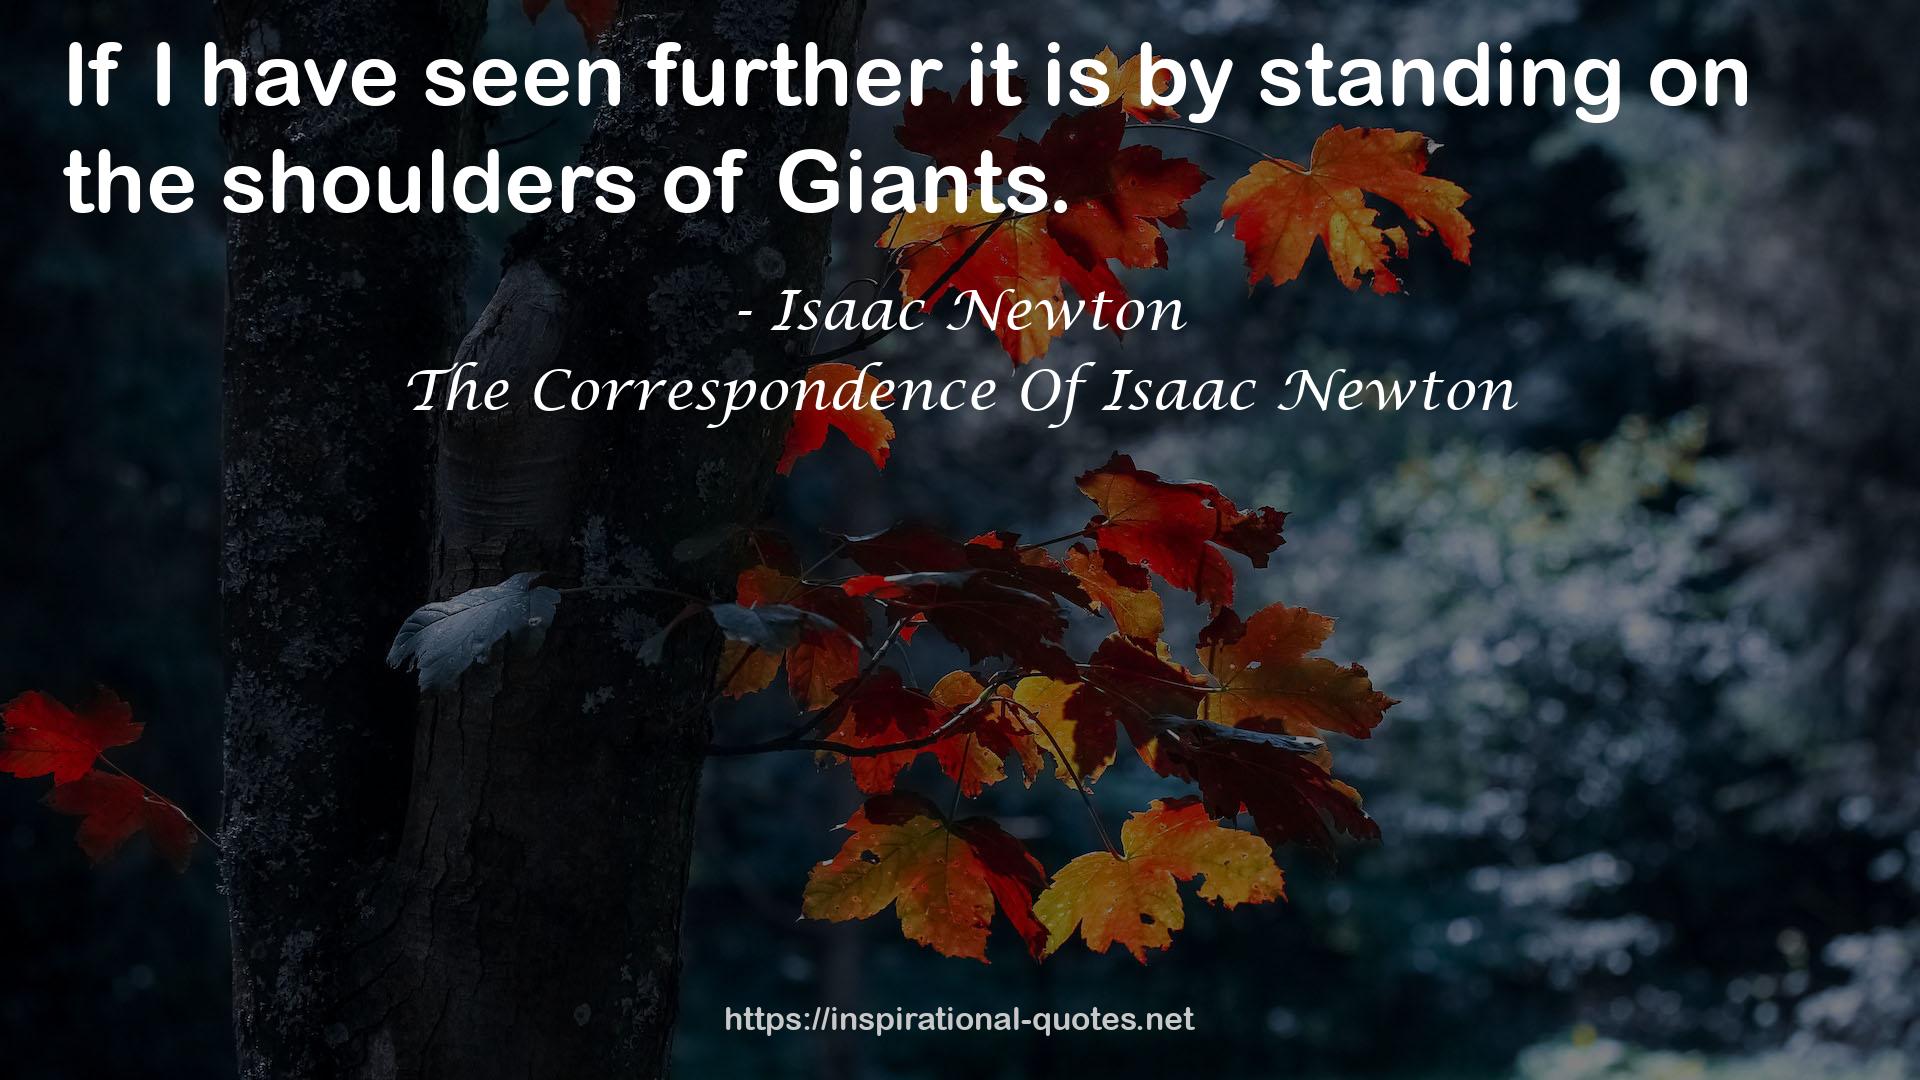 The Correspondence Of Isaac Newton QUOTES